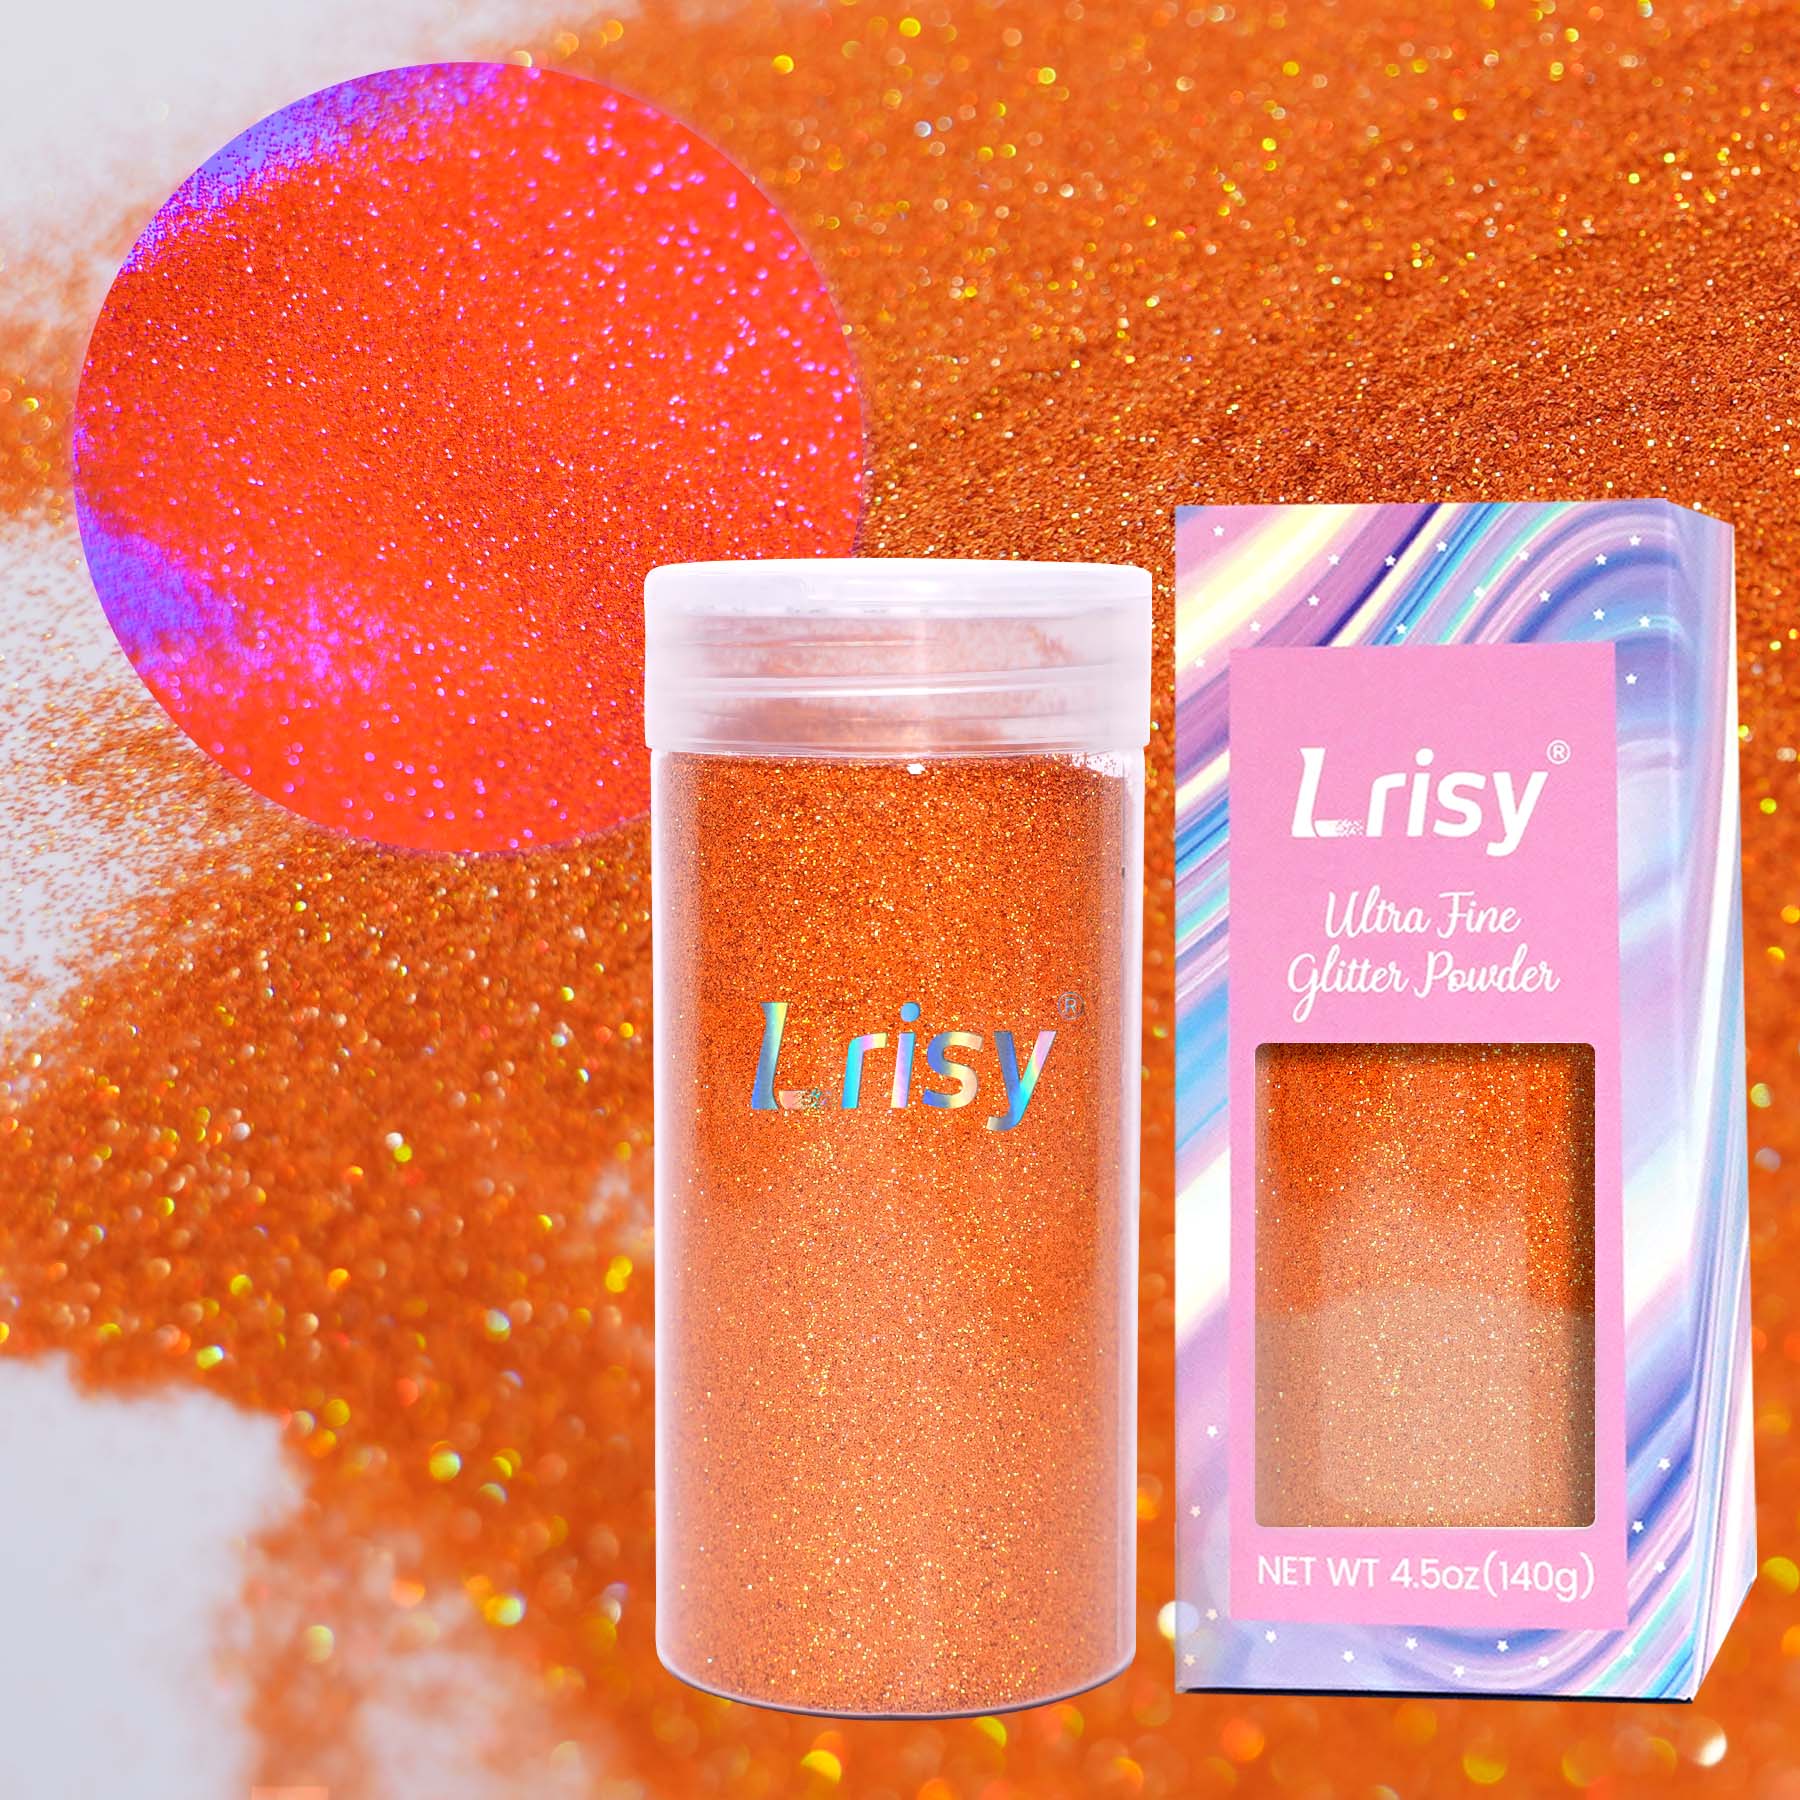 Lrisy Holographic Extra Fine Neon Punk Glitter Powder with Shaker Lid 140g/4.5oz (Holographic Coppery)